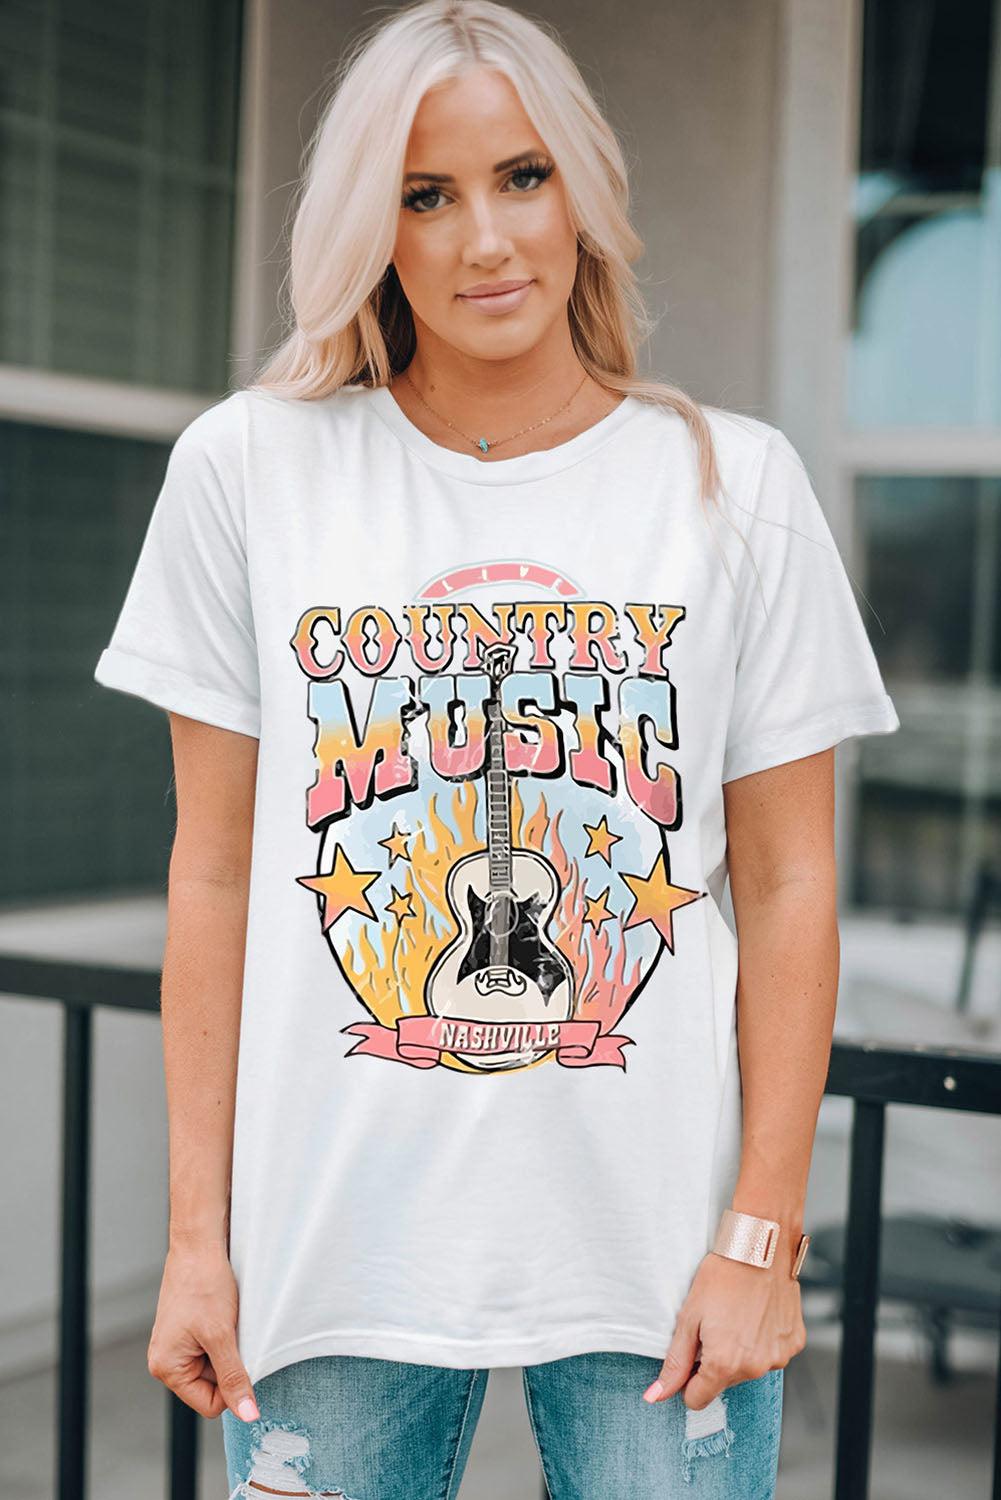 COUNTRY MUSIC NASHVILLE Graphic Tee Shirt BLUE ZONE PLANET